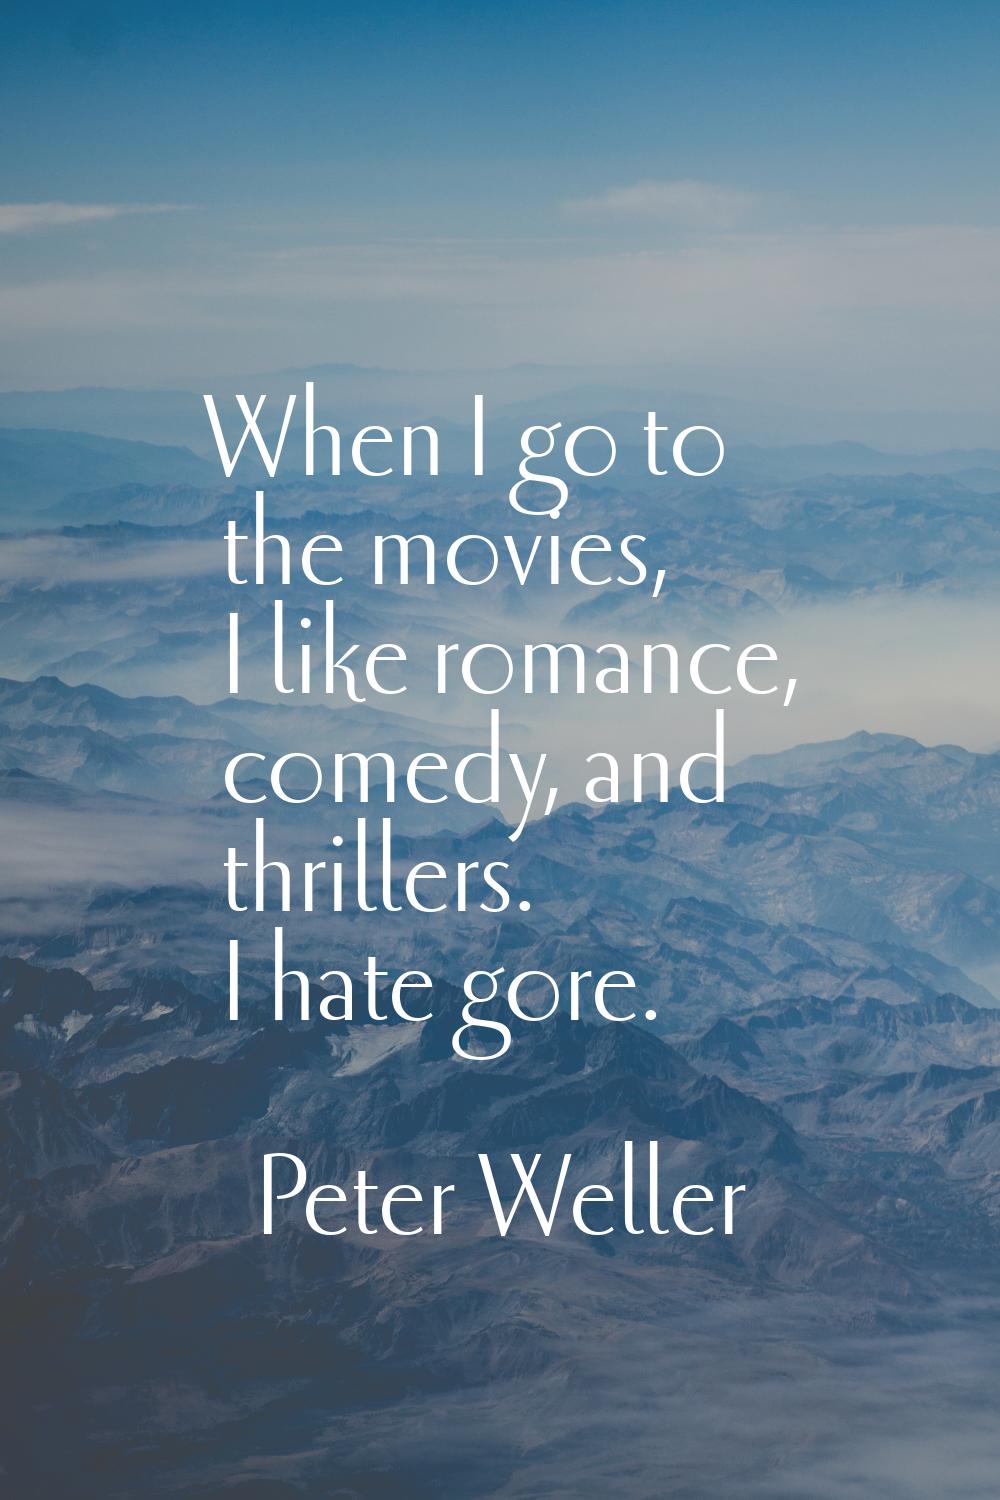 When I go to the movies, I like romance, comedy, and thrillers. I hate gore.